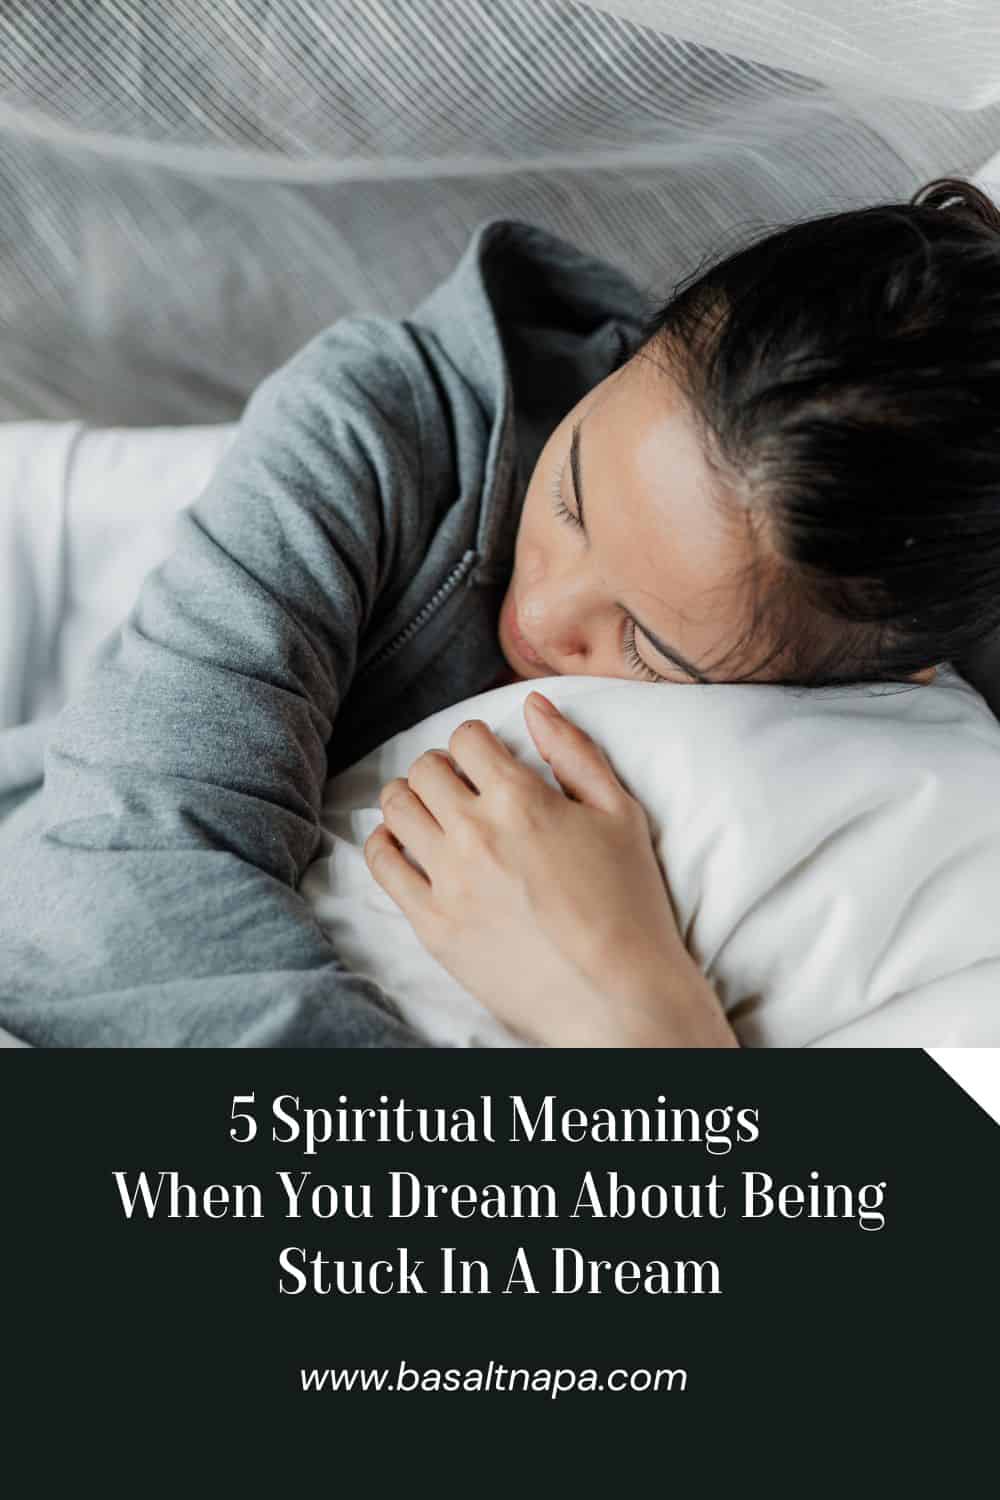 5 Spiritual Meanings When You Dream About Being Stuck In A Dream